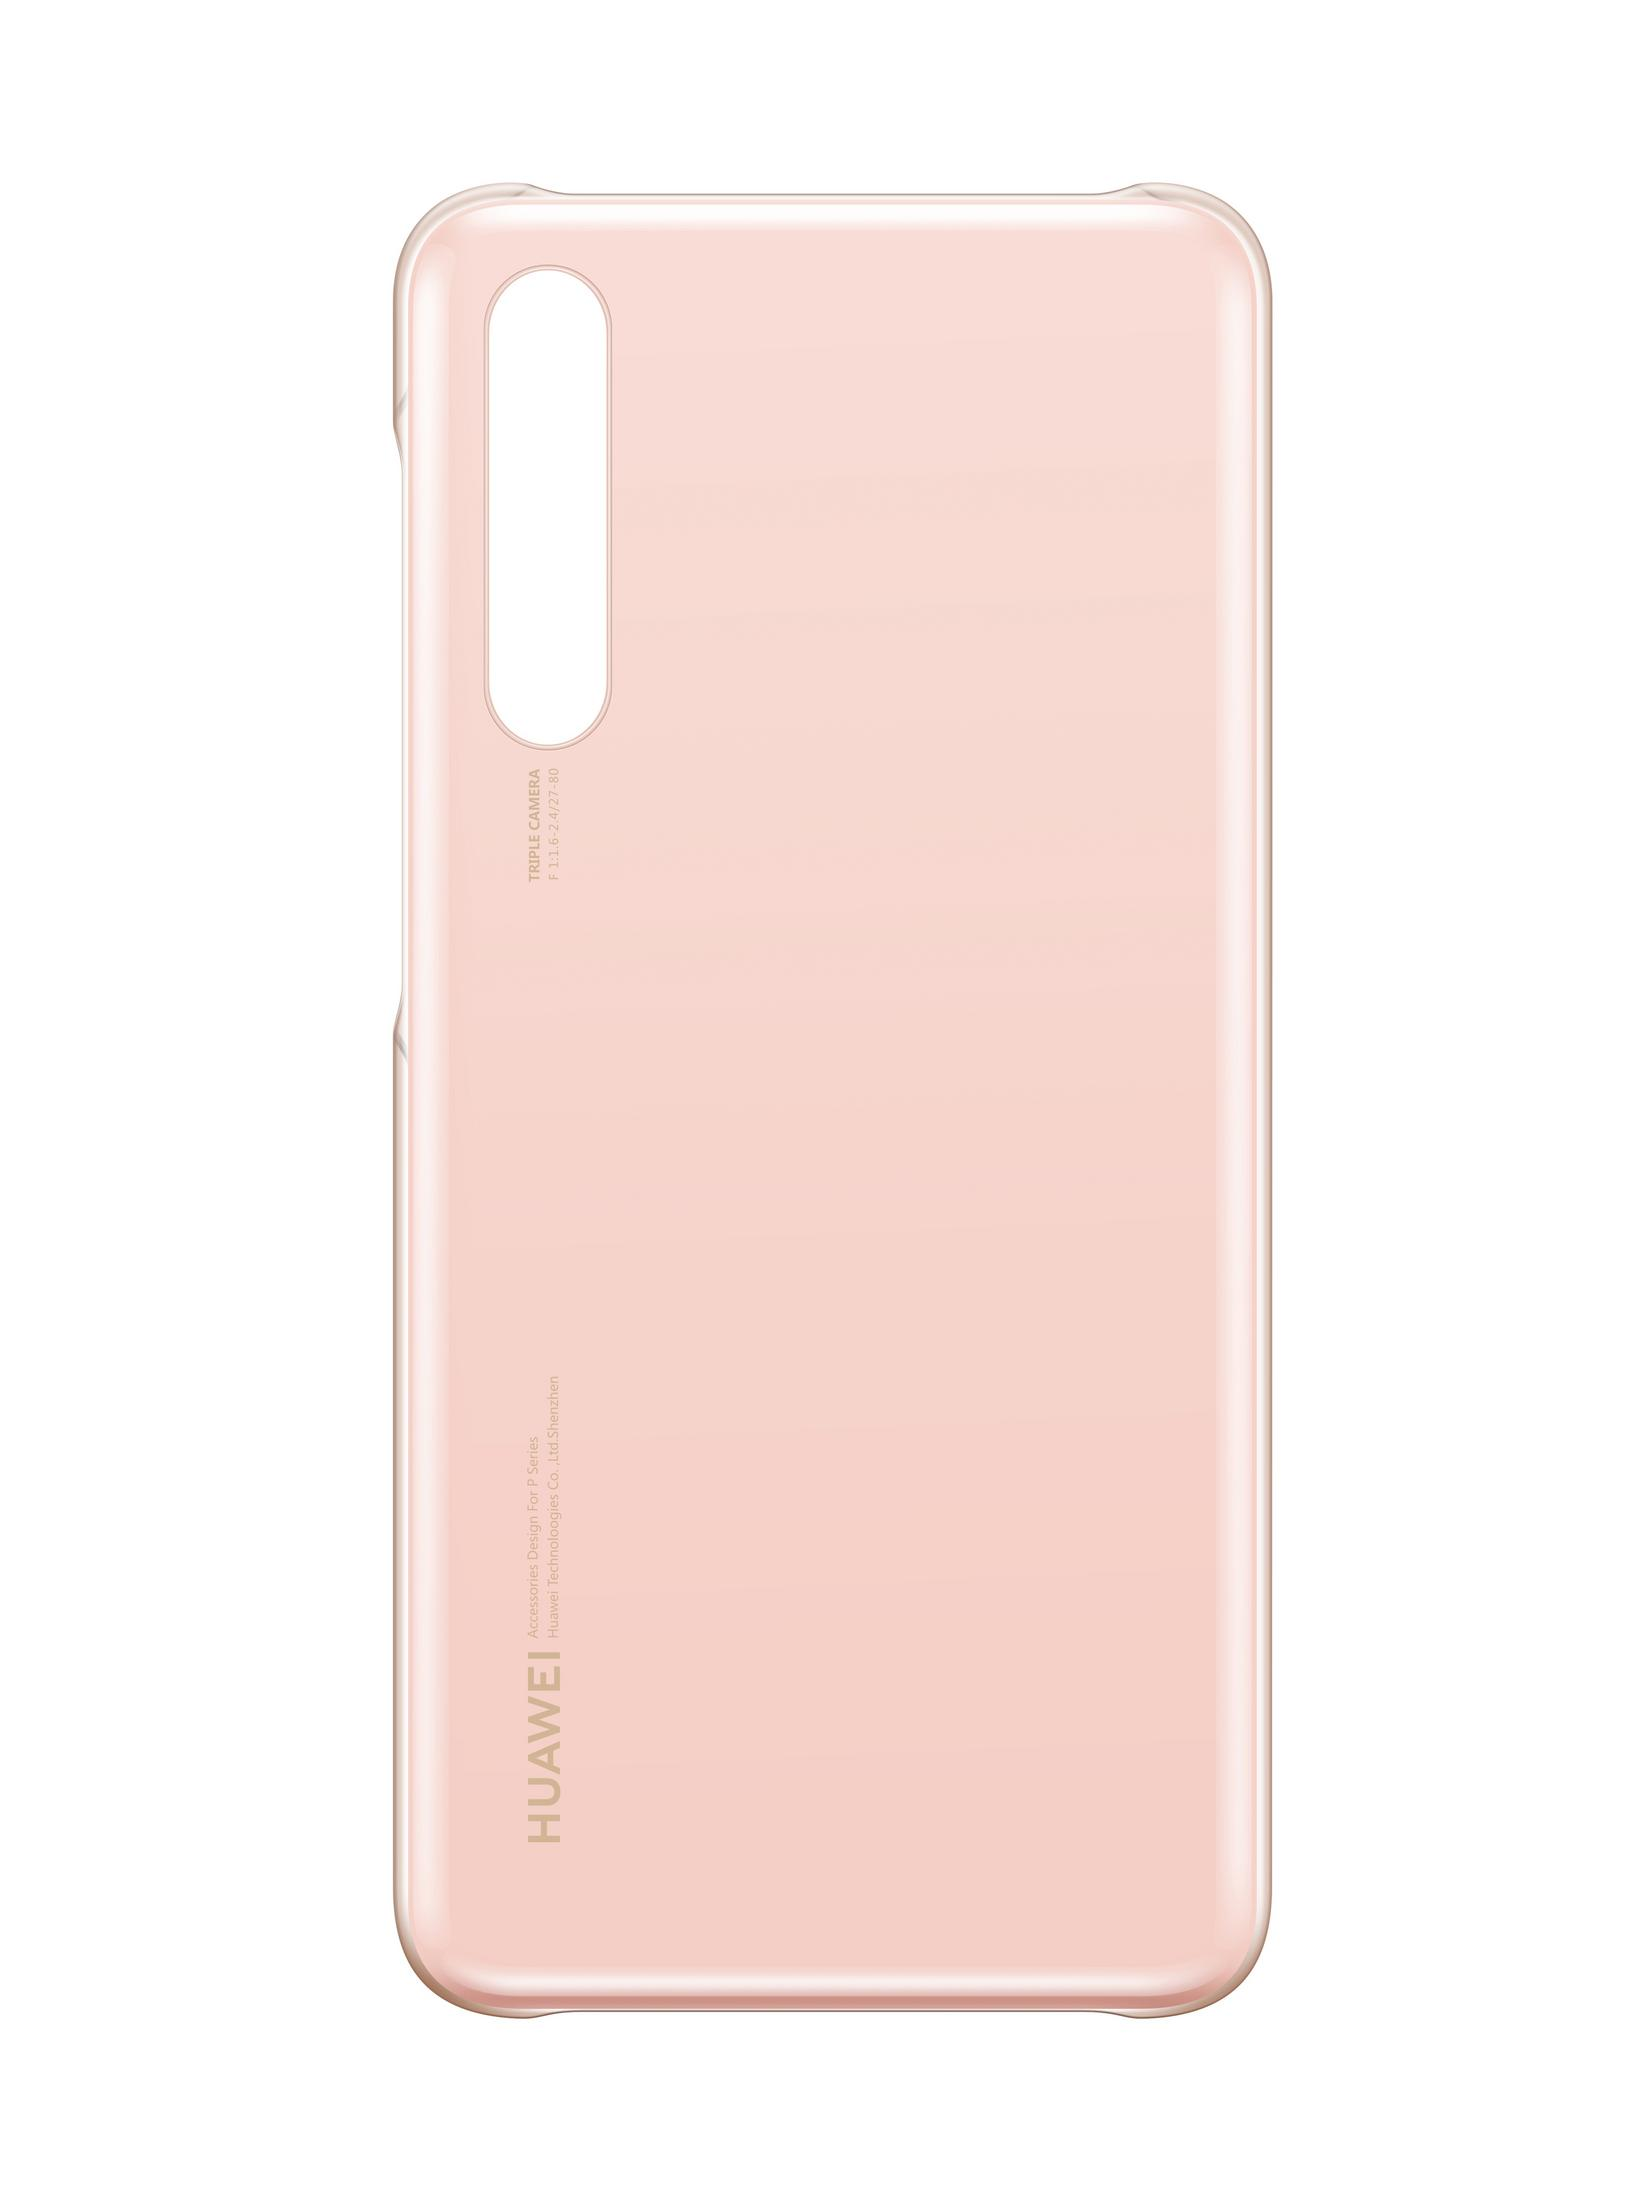 HUAWEI 51992376 P20 Backcover, CASE Pink Pro, P20 PINK, COLOR PRO Huawei